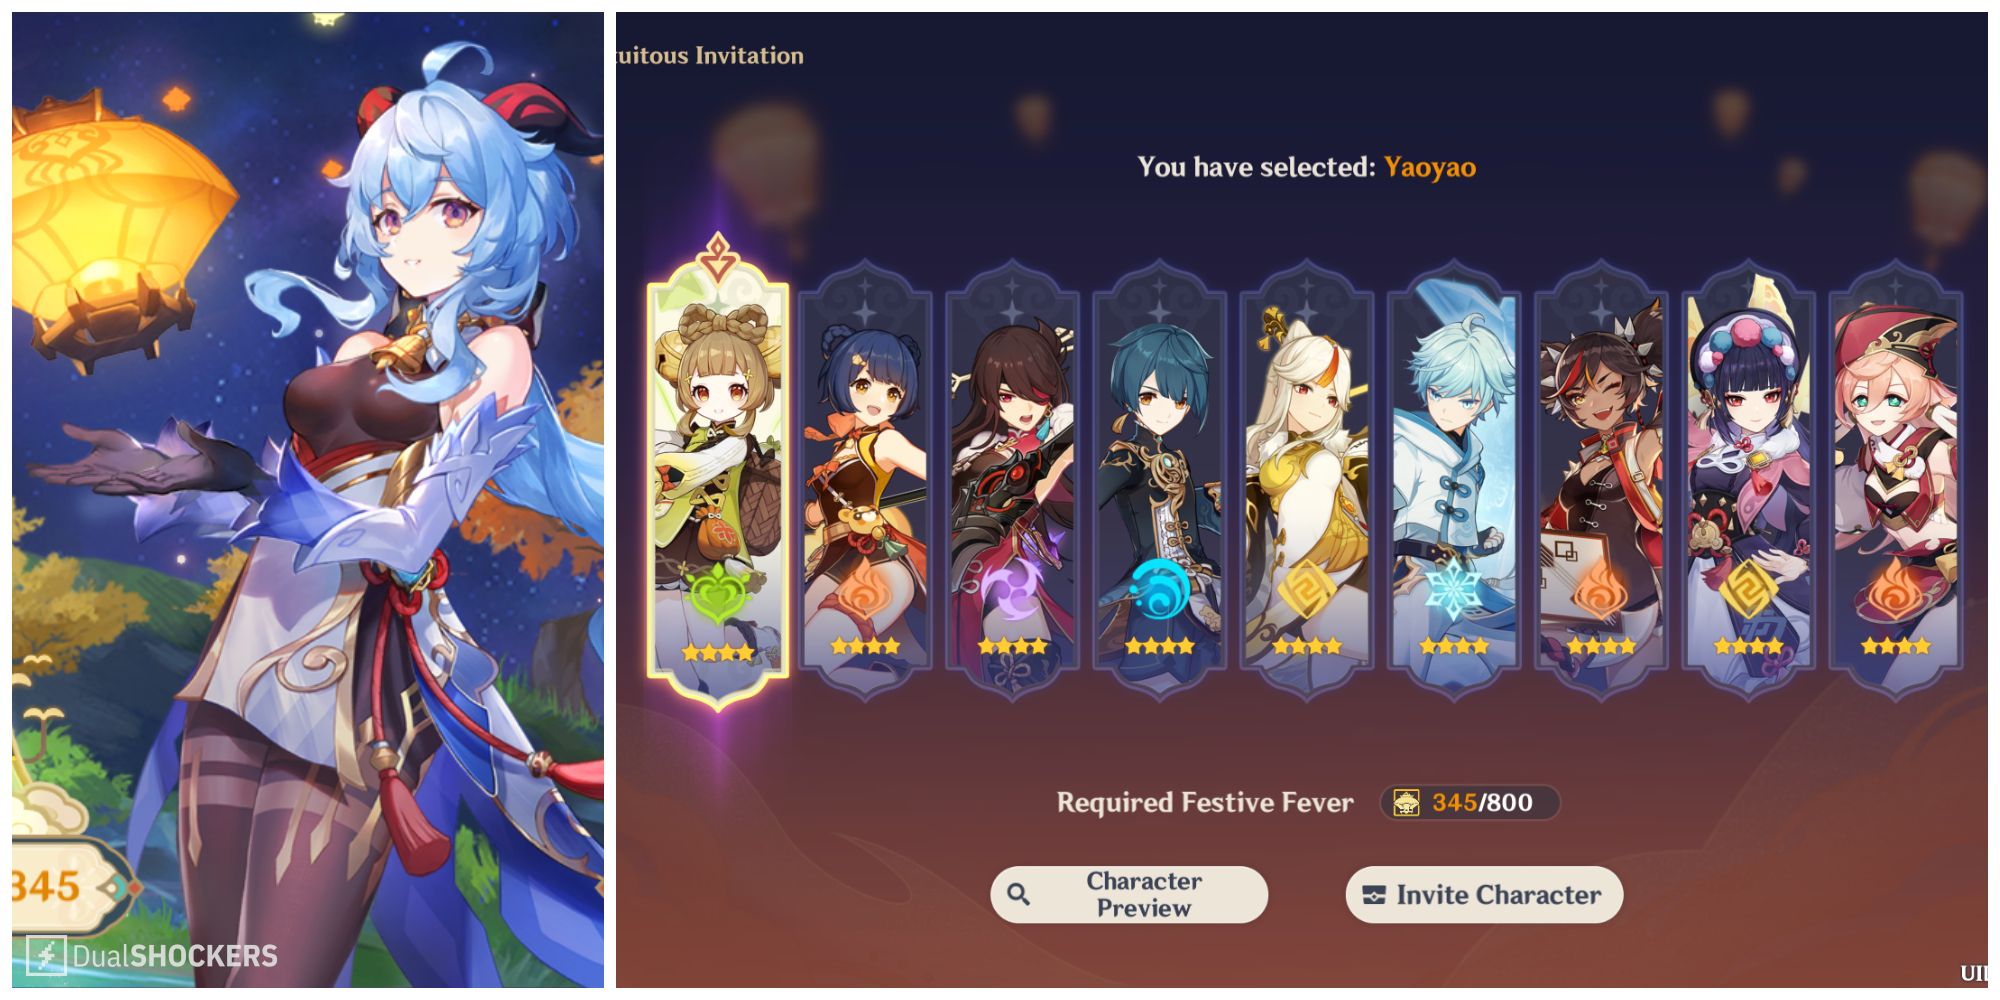 Genshin Impact: How To Get A 4-Star Liyue Character With Festive Fever